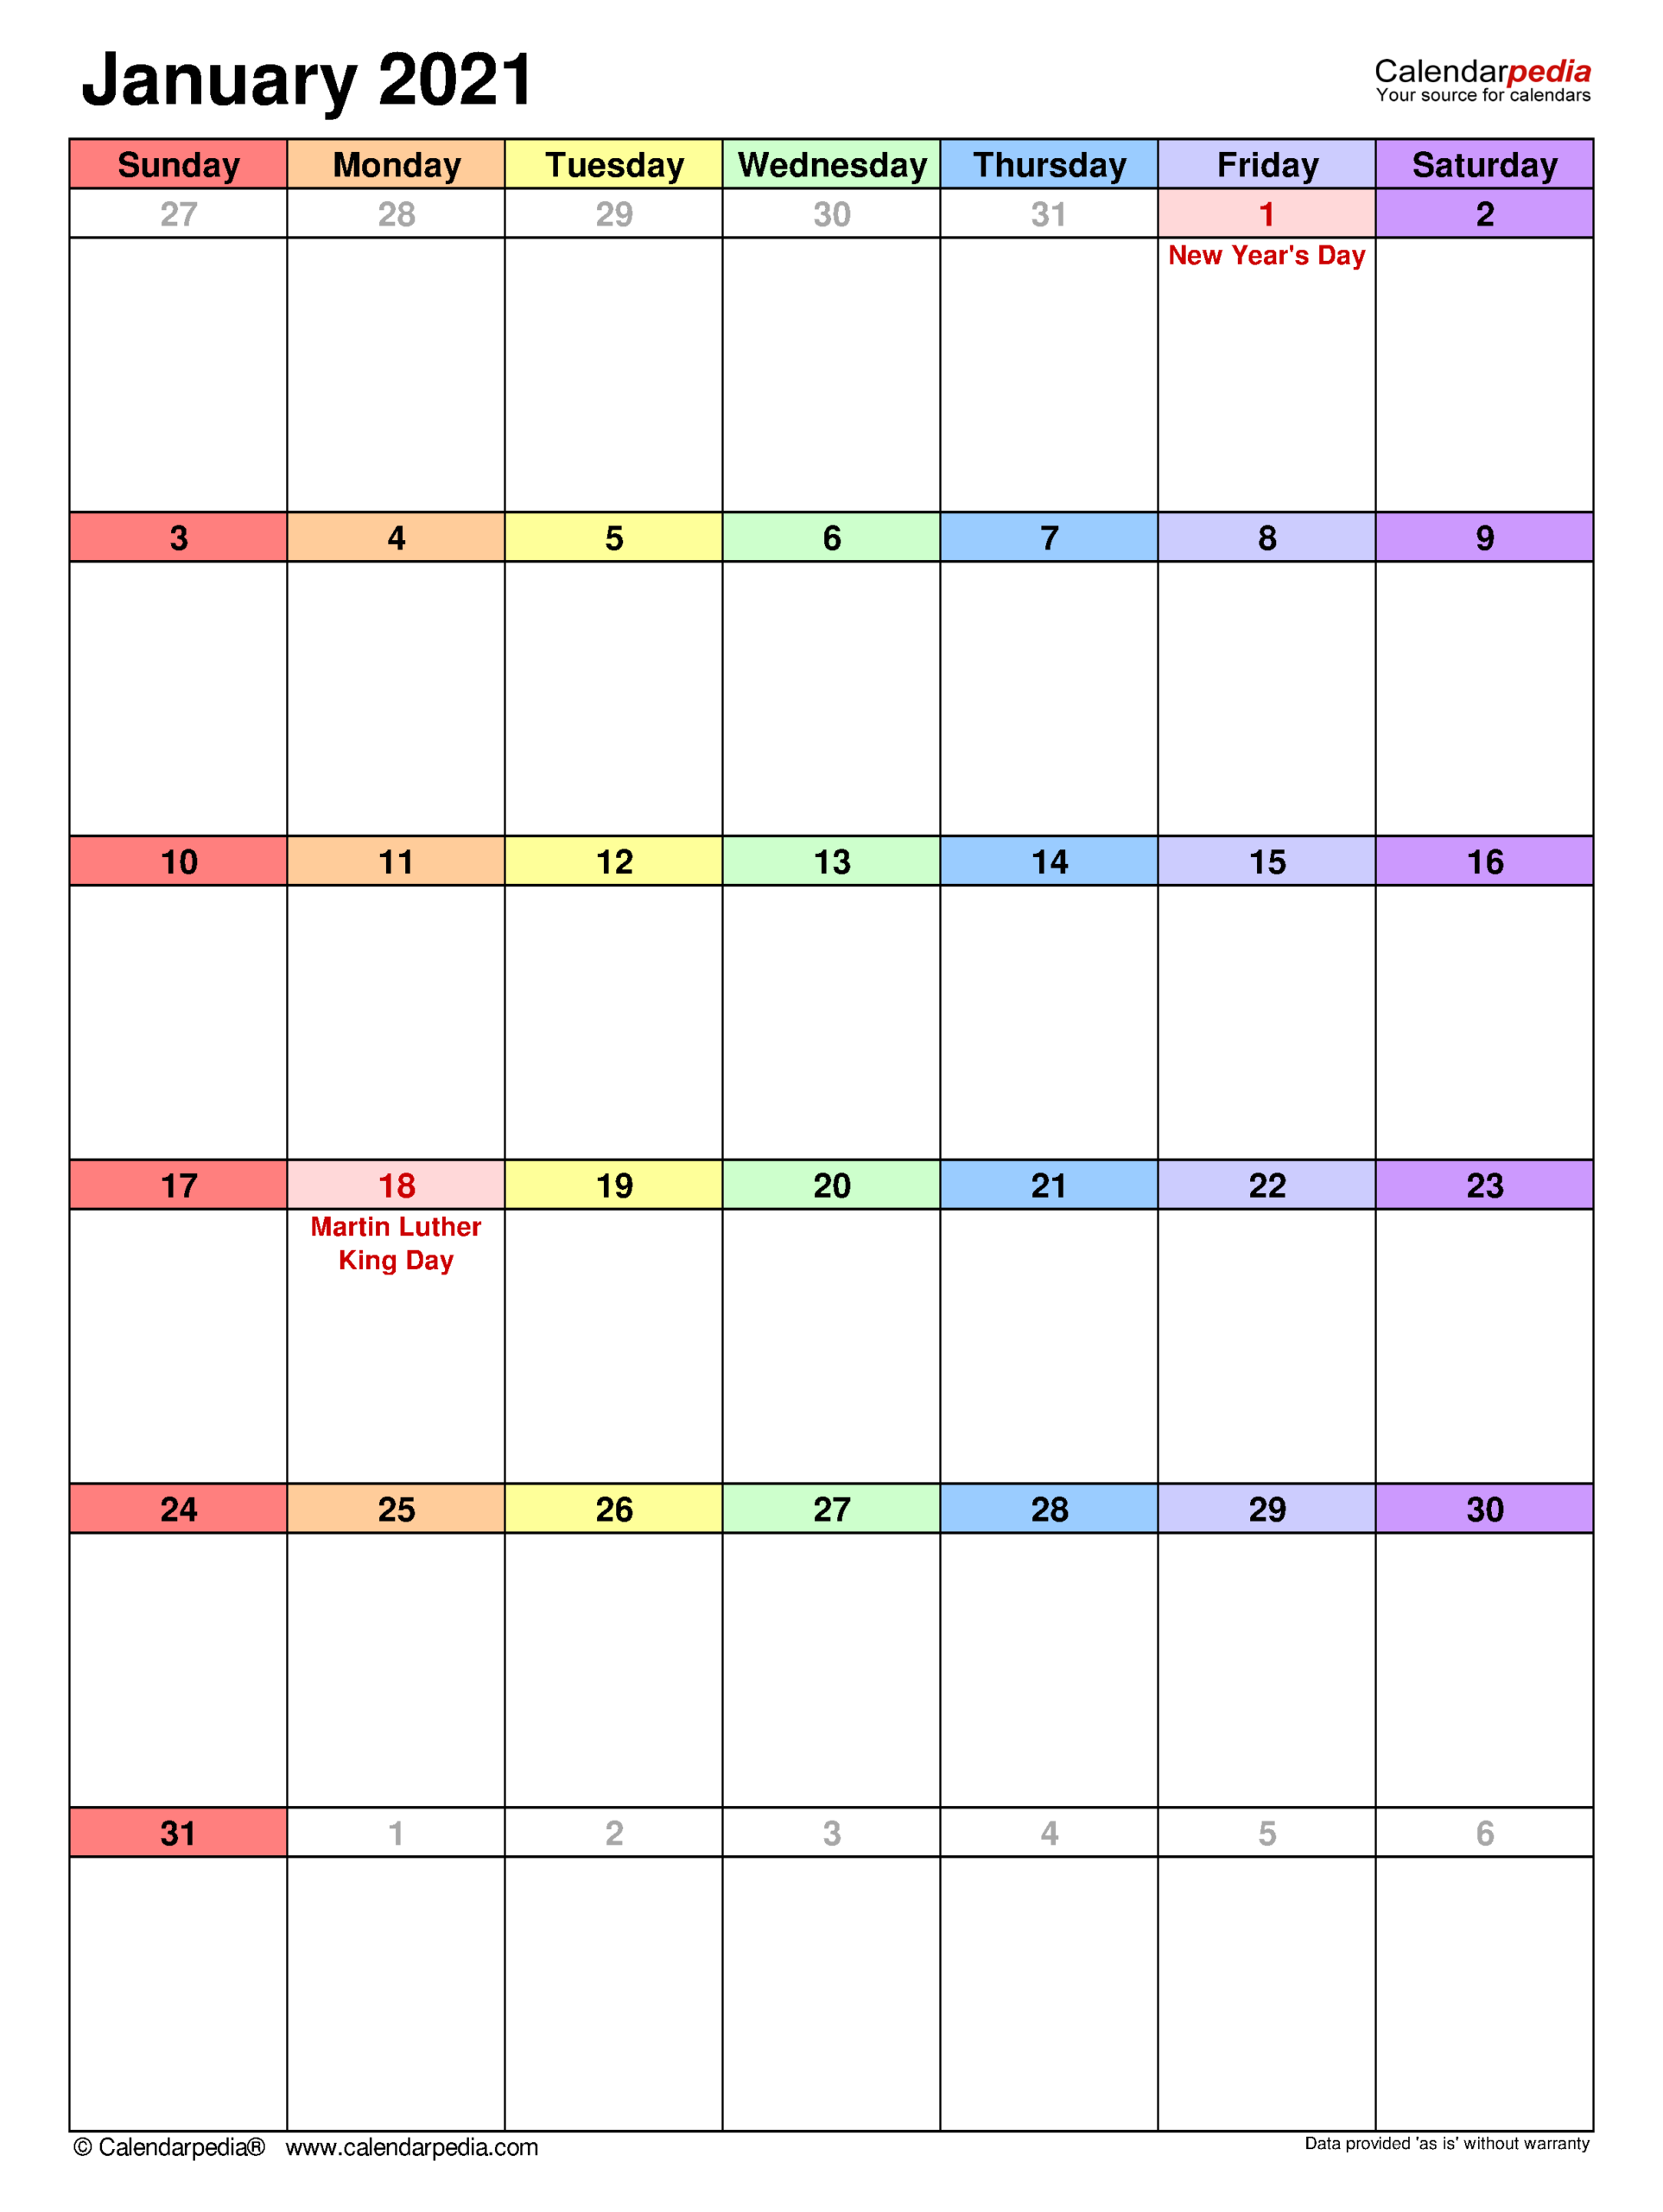 January 2021 Calendar | Templates For Word, Excel And Pdf